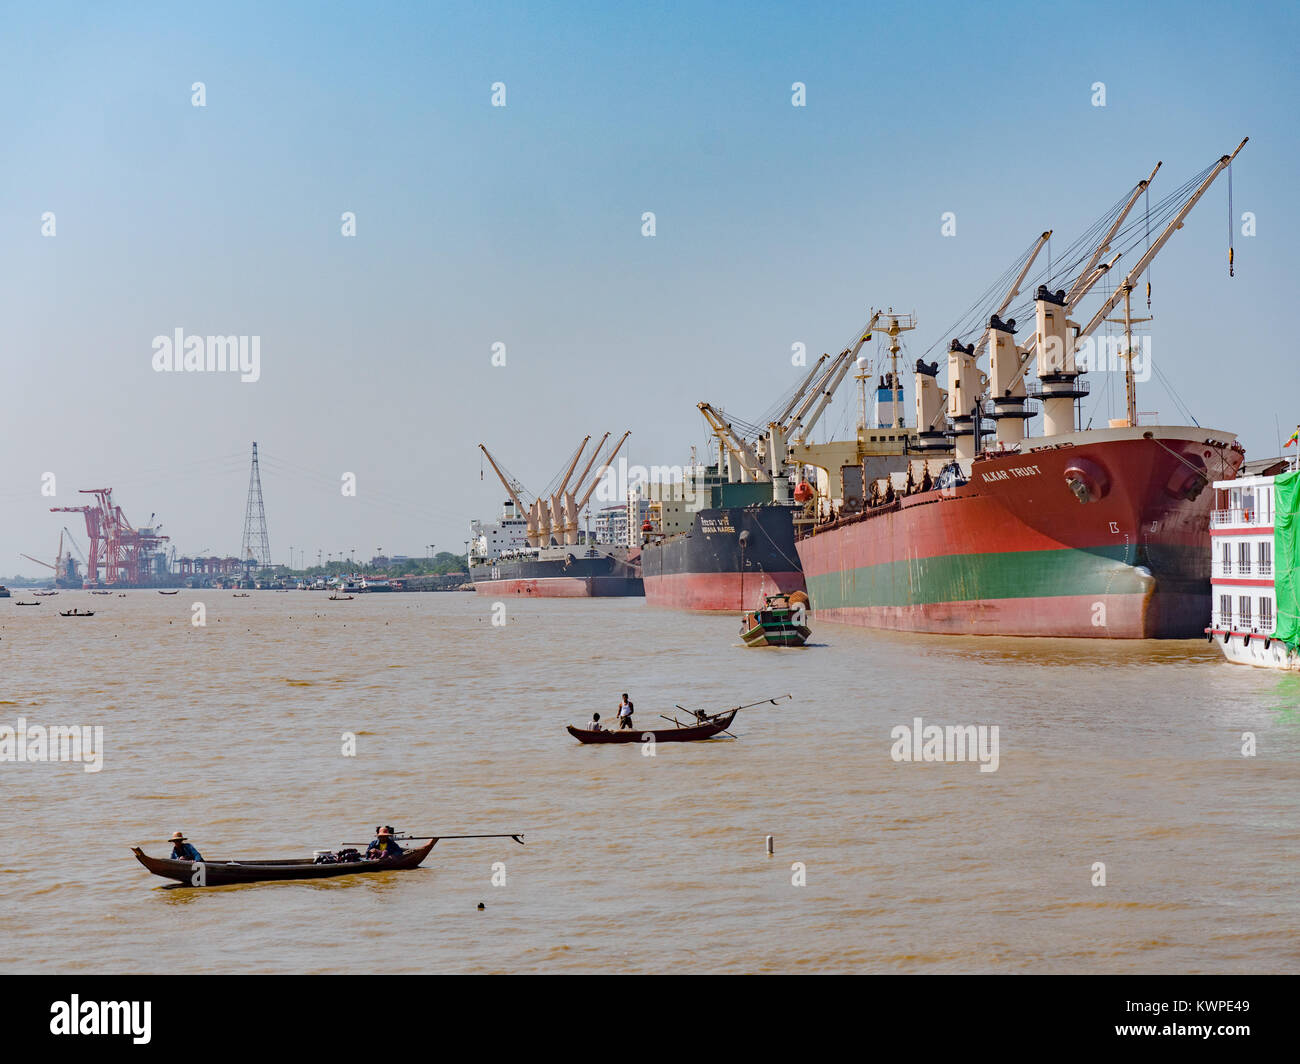 Small, traditional fishing boats catching fish on Yangon River next to one of Yangonâ€™s main commercial ports. Stock Photo